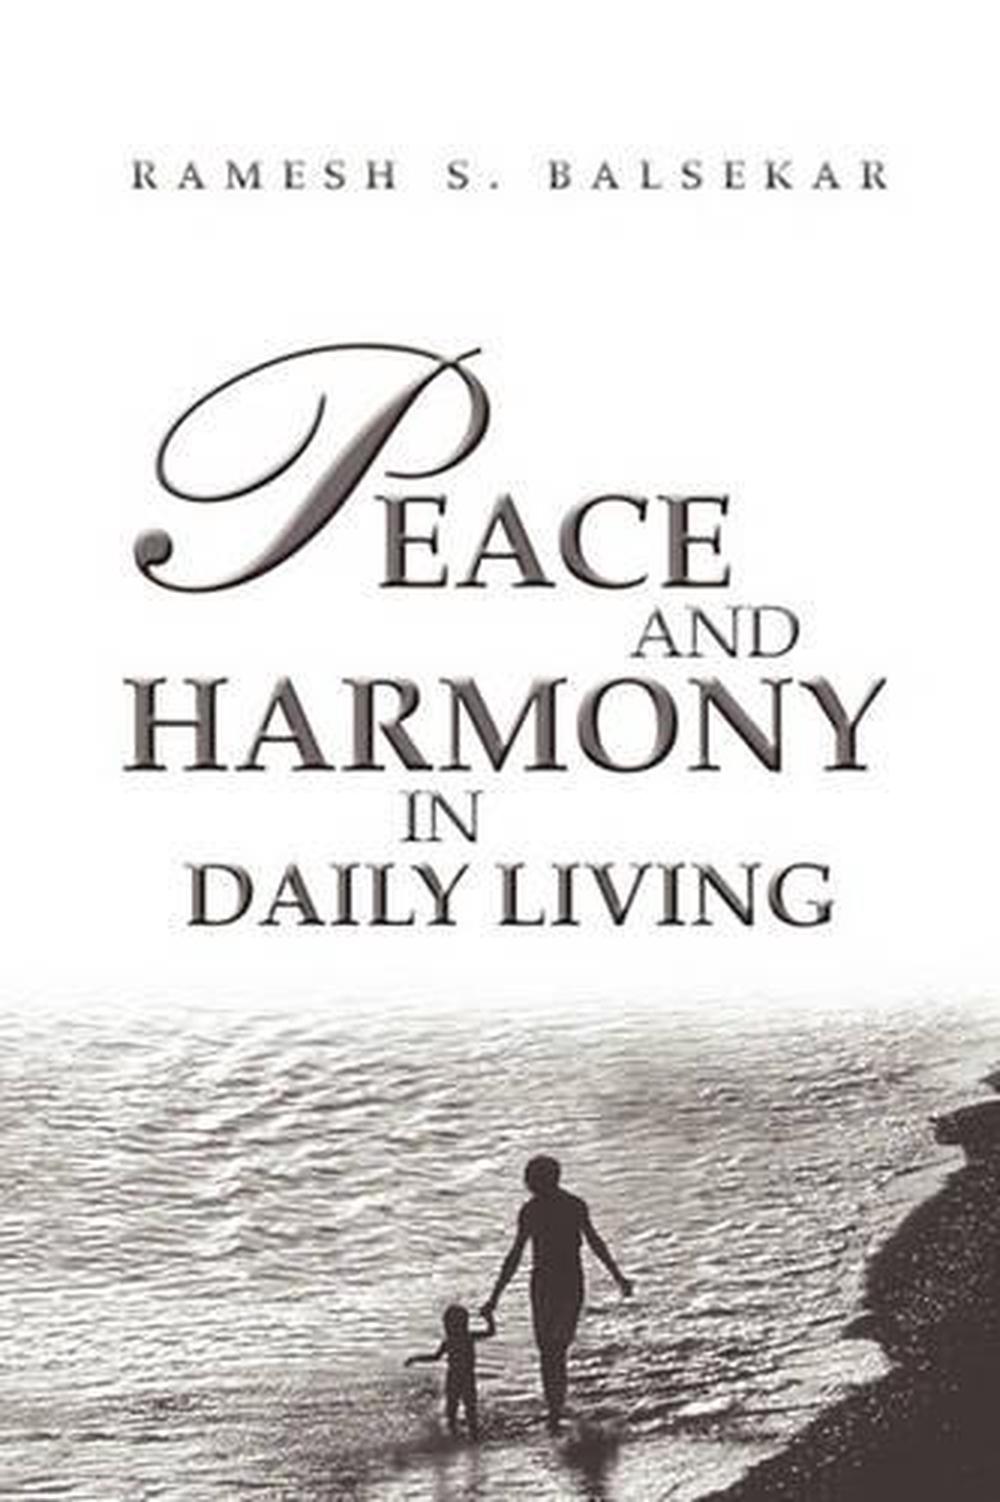 Peace and Harmony in Daily Living by Ramesh S. Balsekar (English) Paperback Book 9788188479566